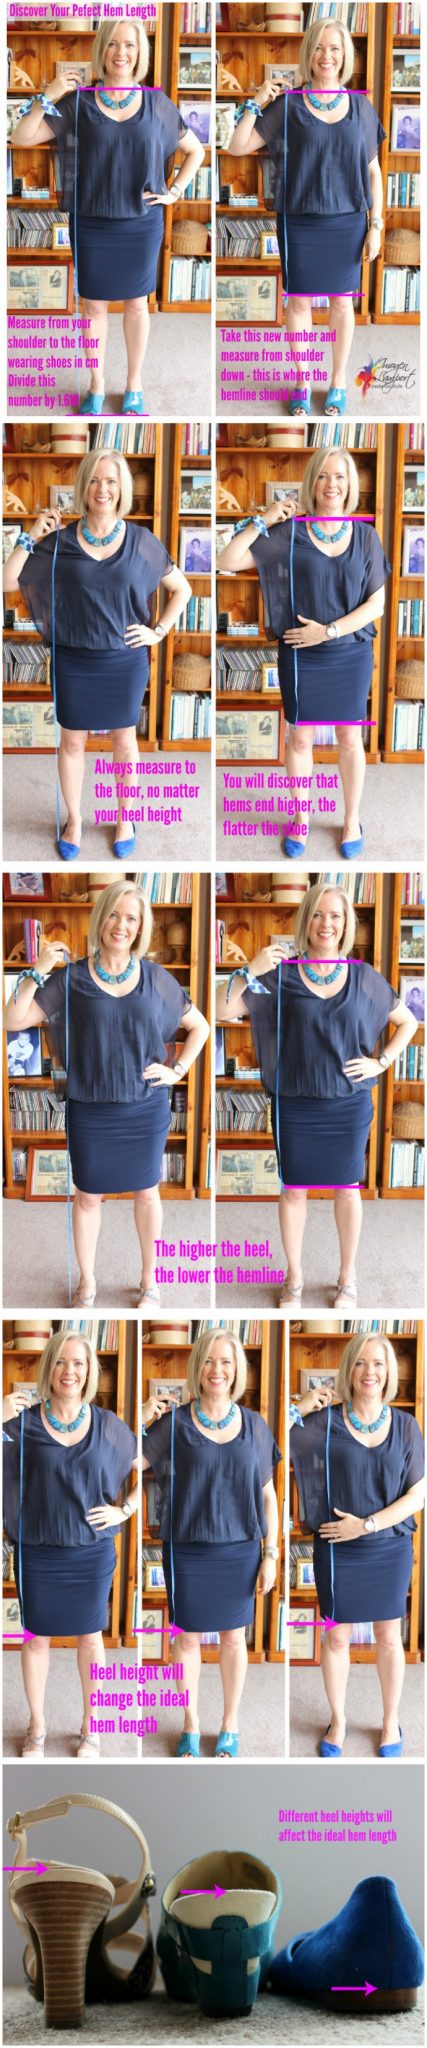 how to discover the perfect hem length